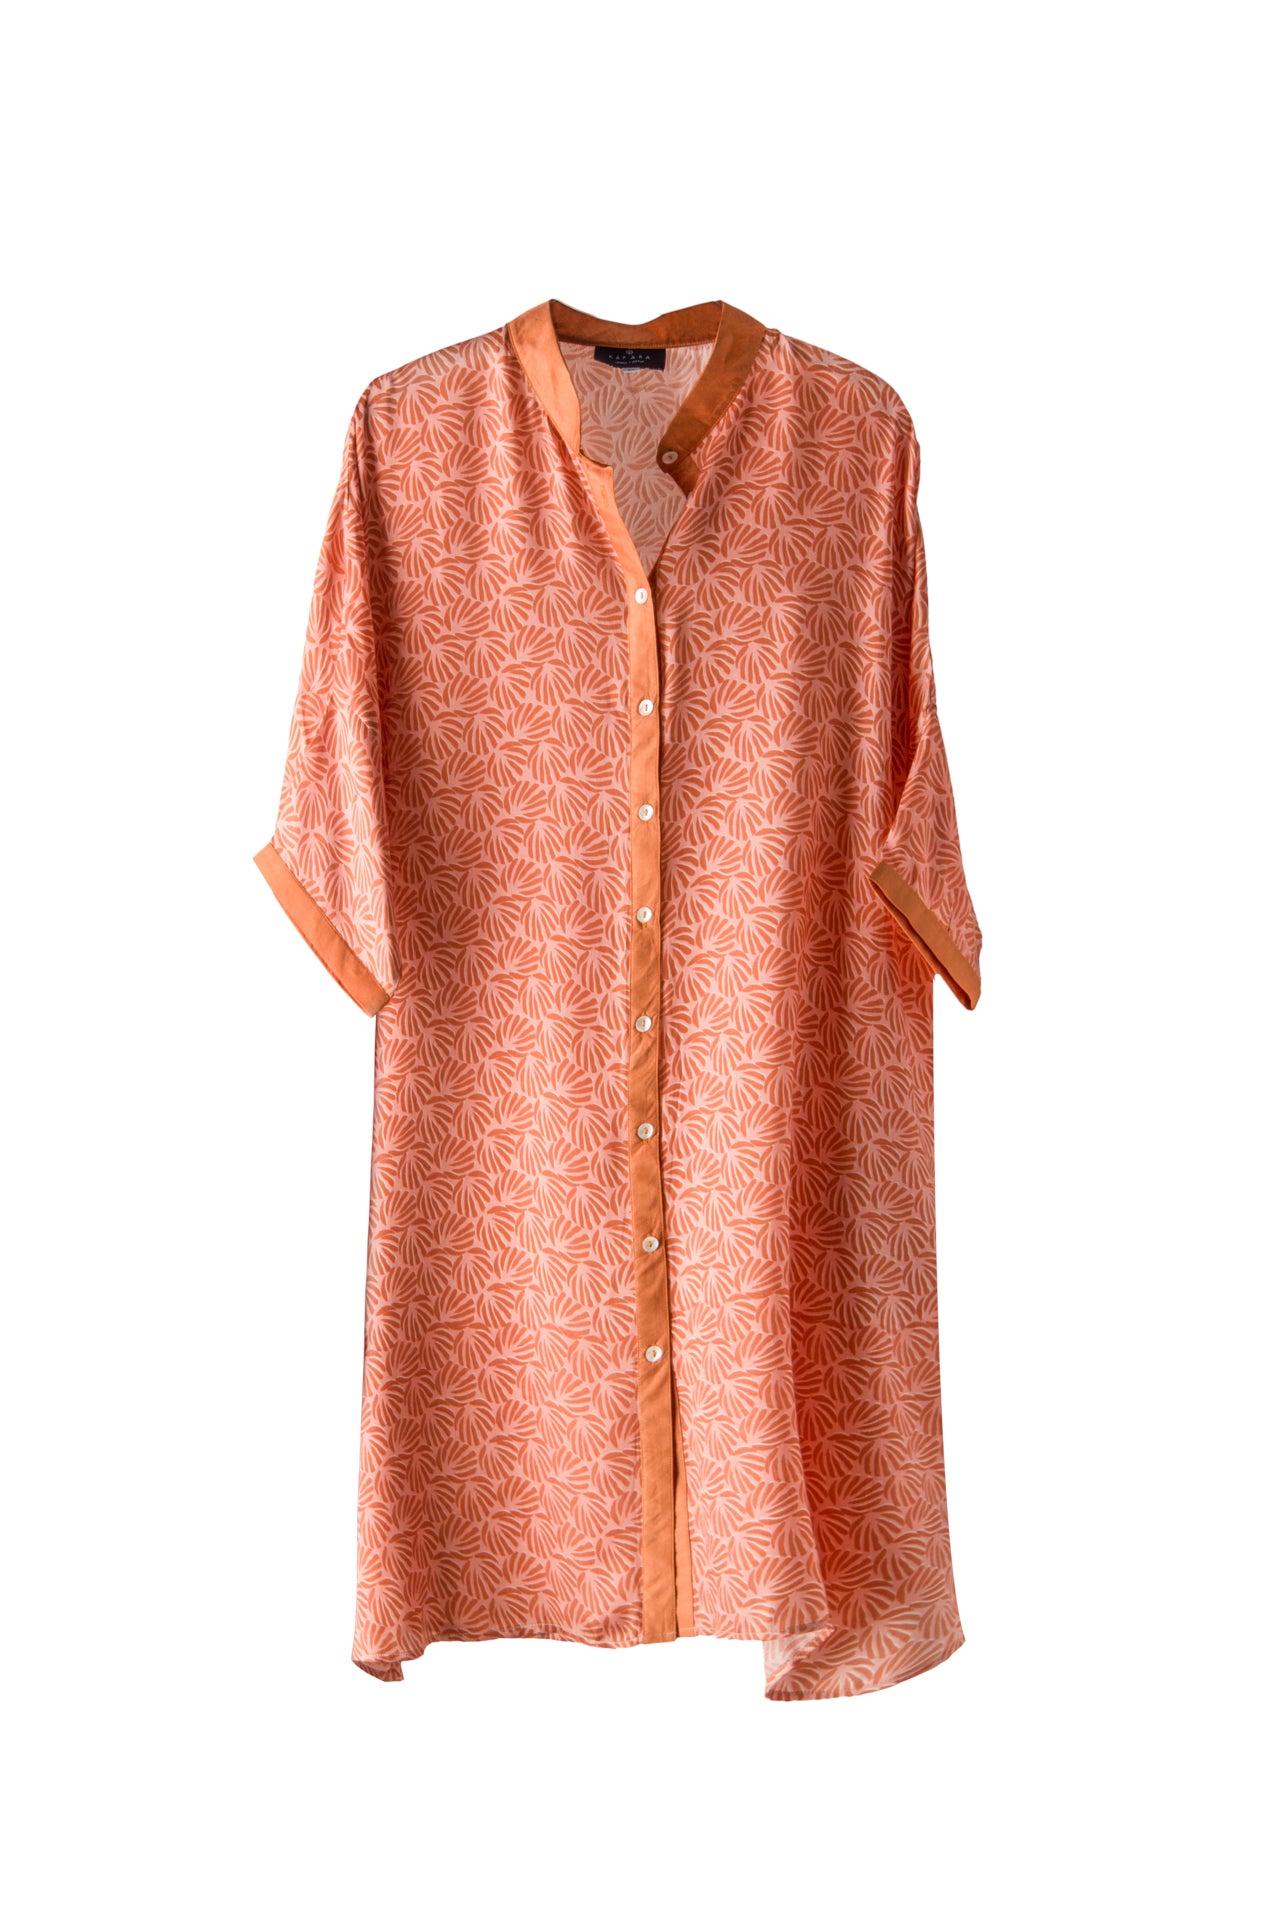 Load image into Gallery viewer, The Veeni Beach Shirt in Orange
